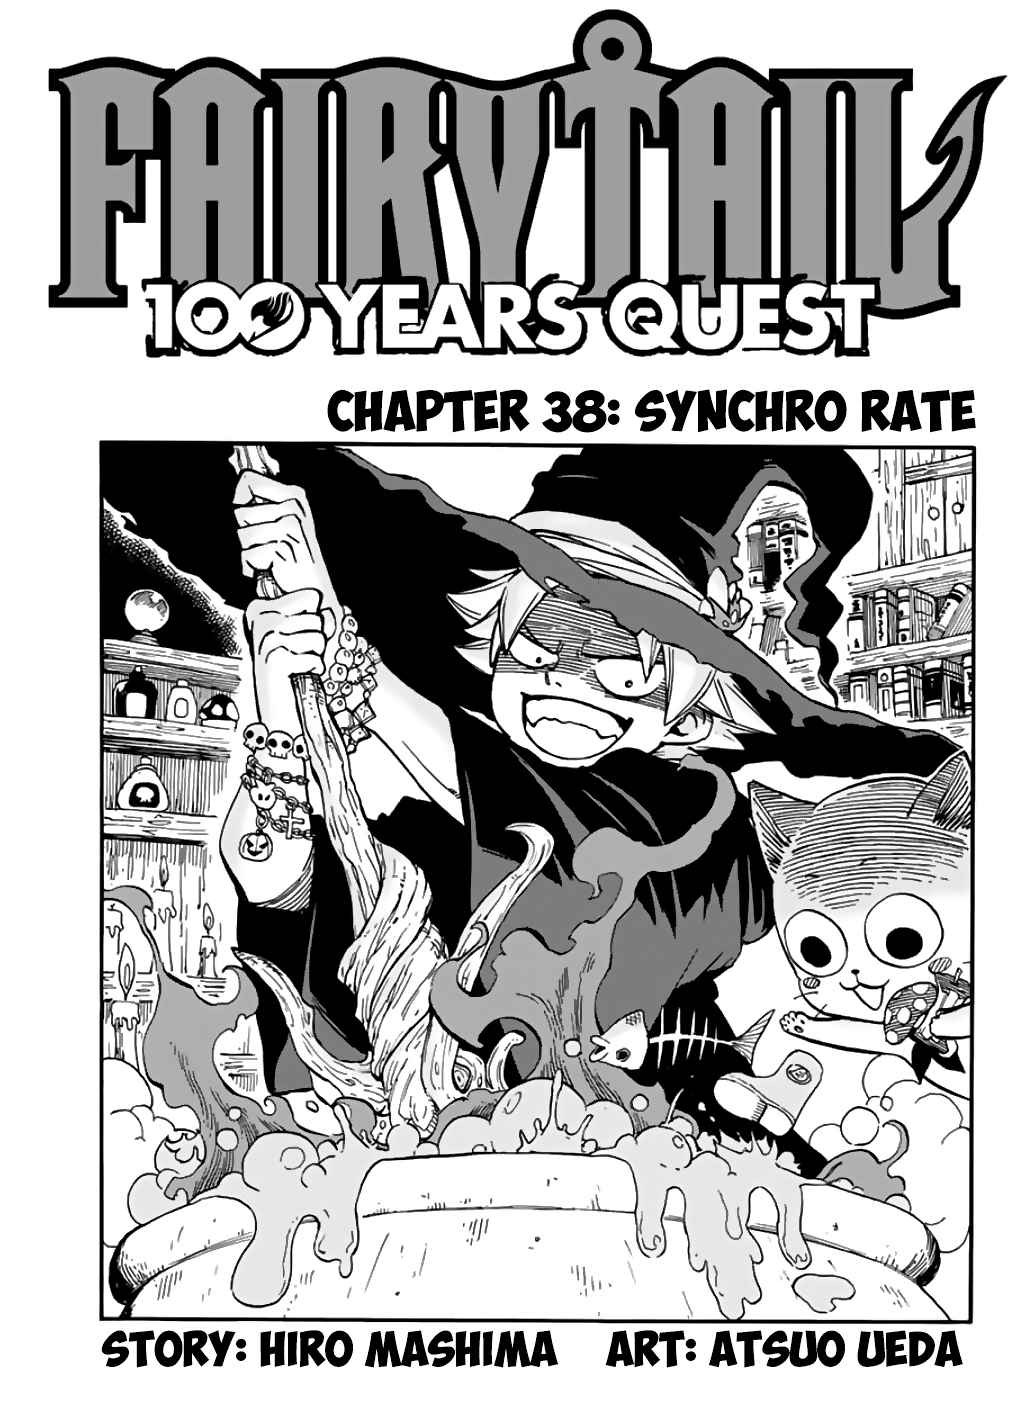 Fairy Tail: 100 Years Quest Ch. 38 Synchro Rate